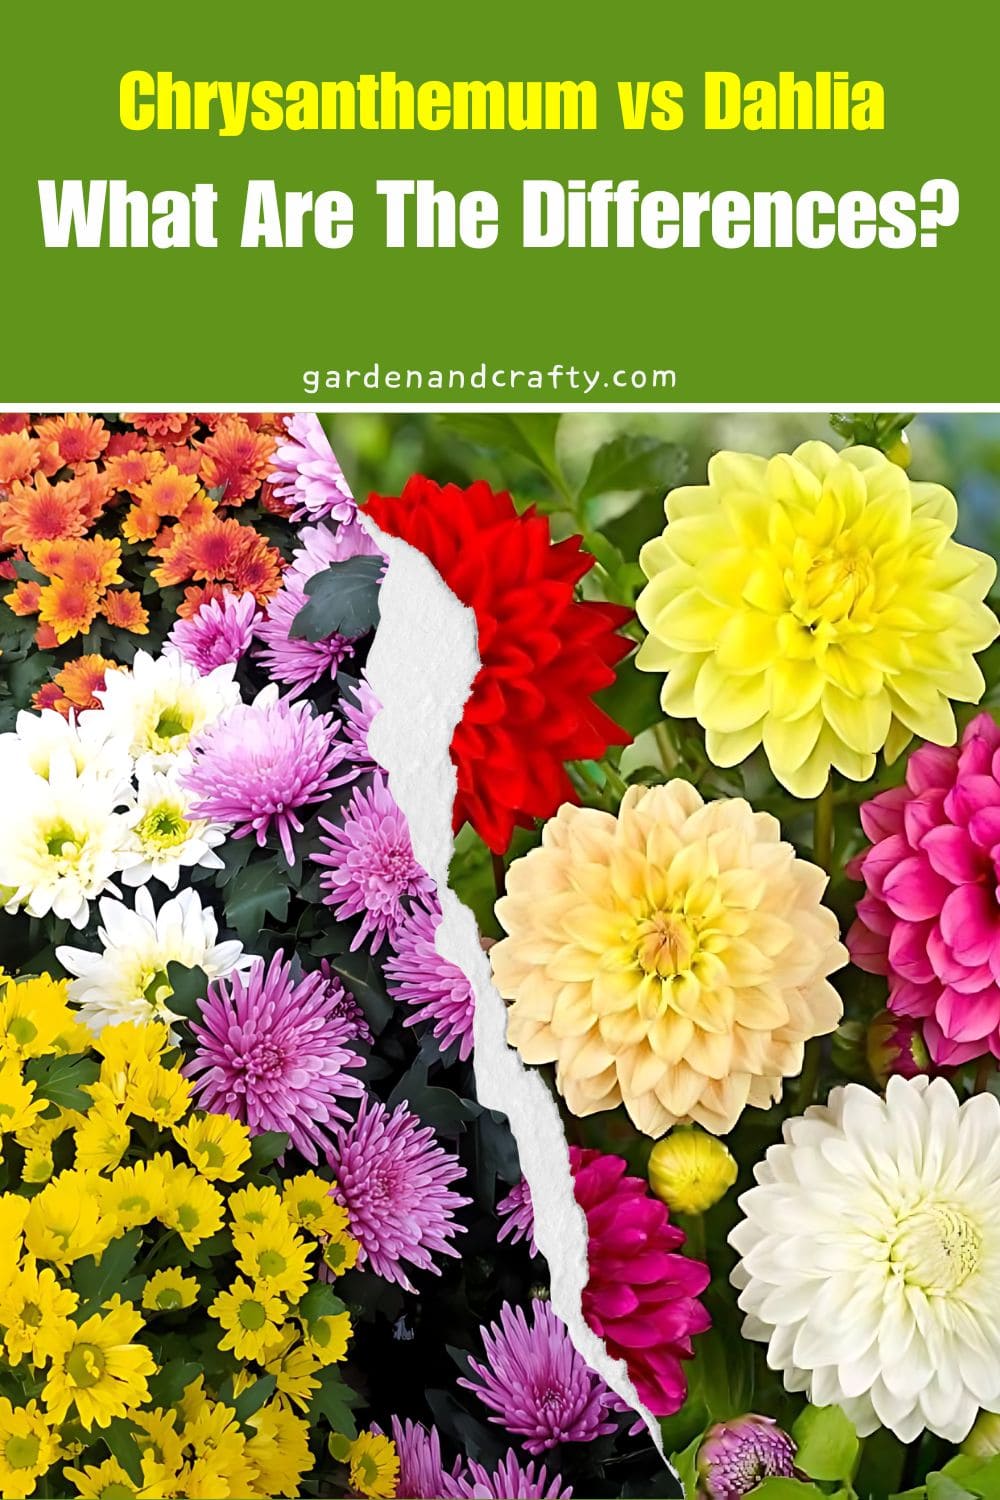 Chrysanthemum vs Dahlia: What Are The Differences?